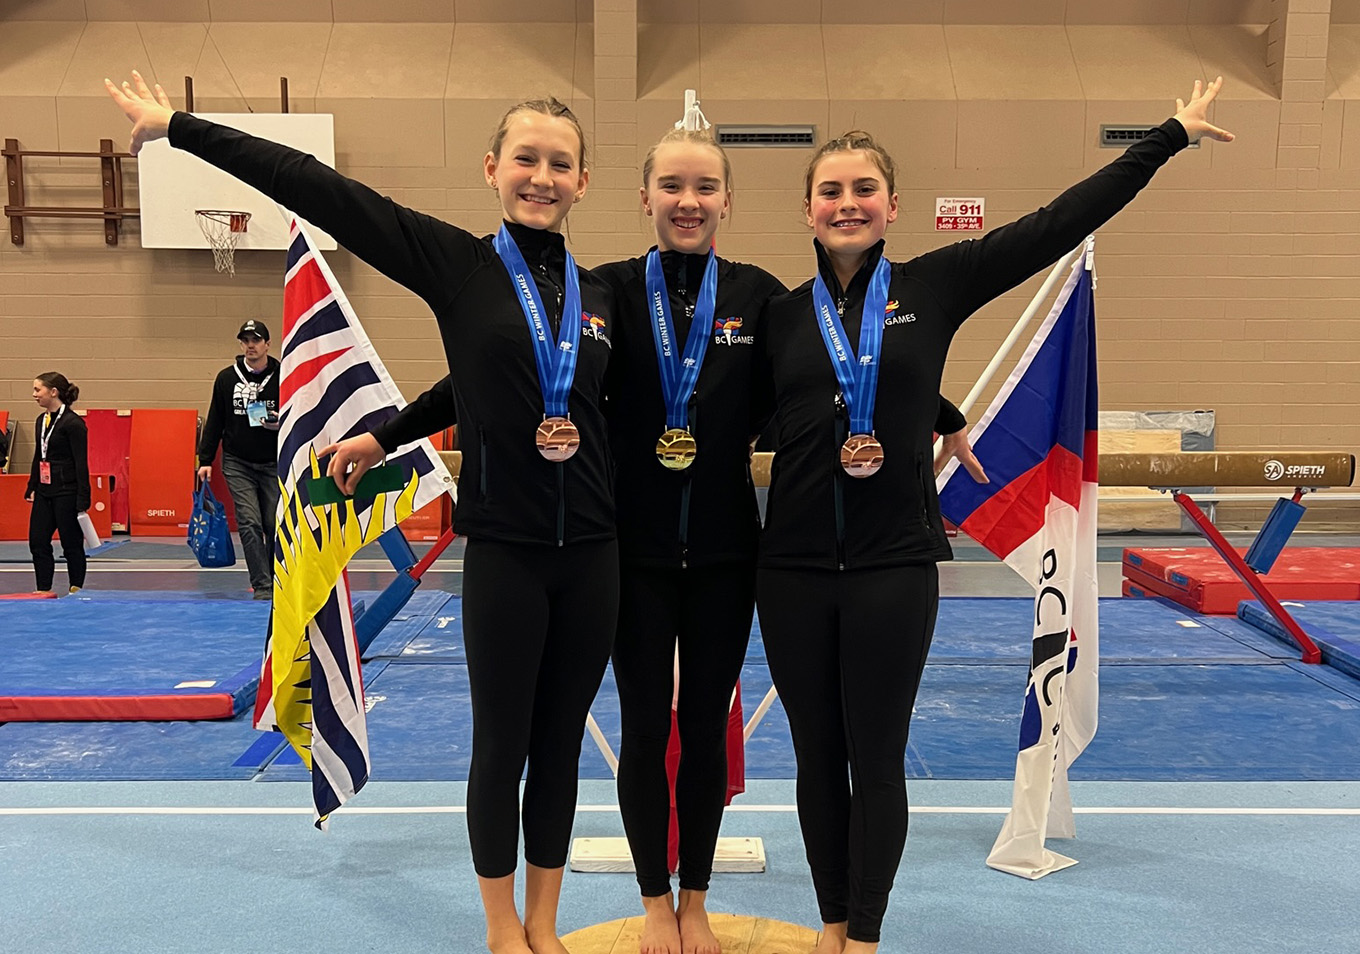 Glaicer gymnasts claim BC Winter Games medals